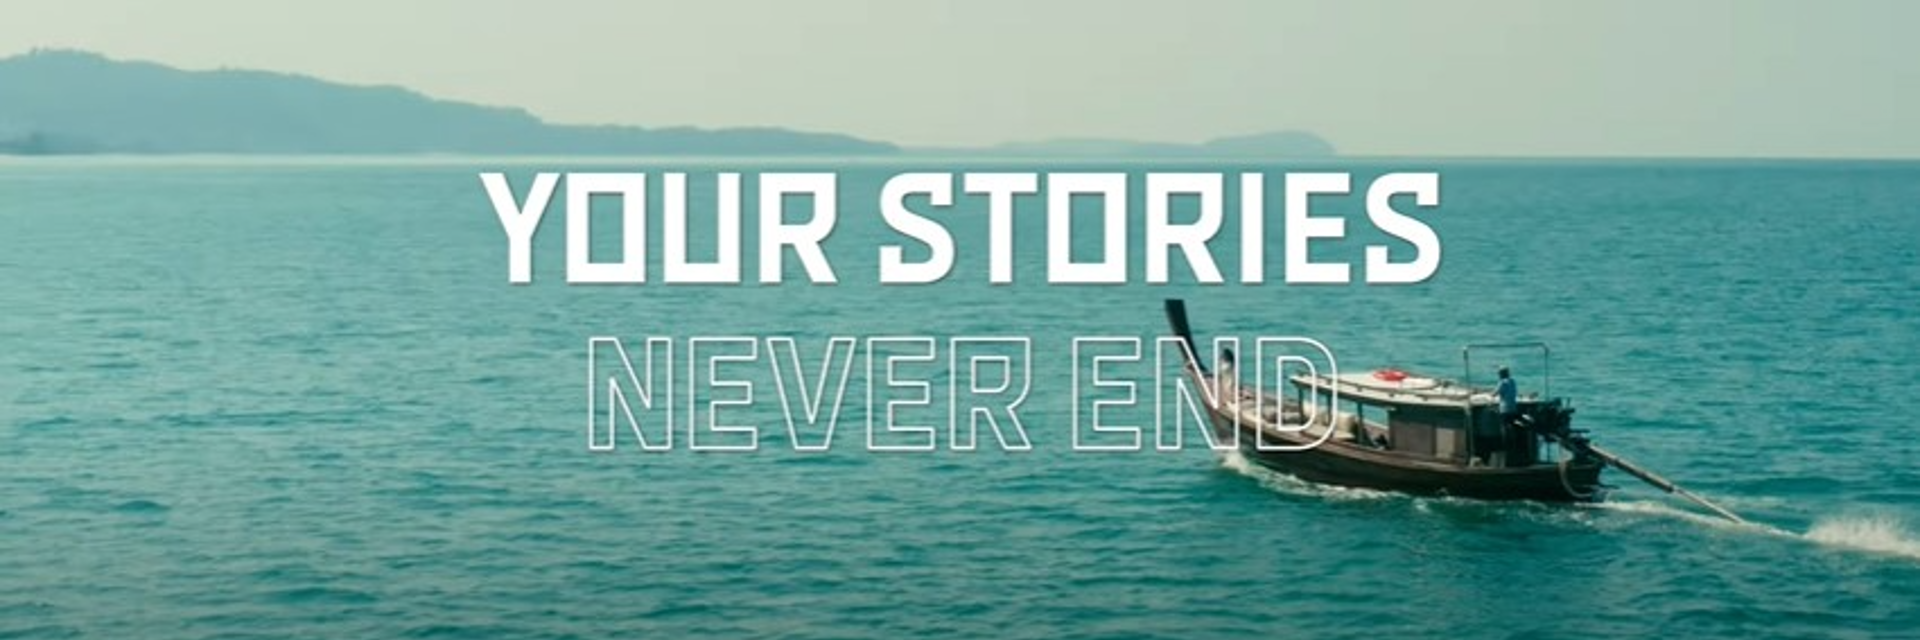 Your Stories Never End